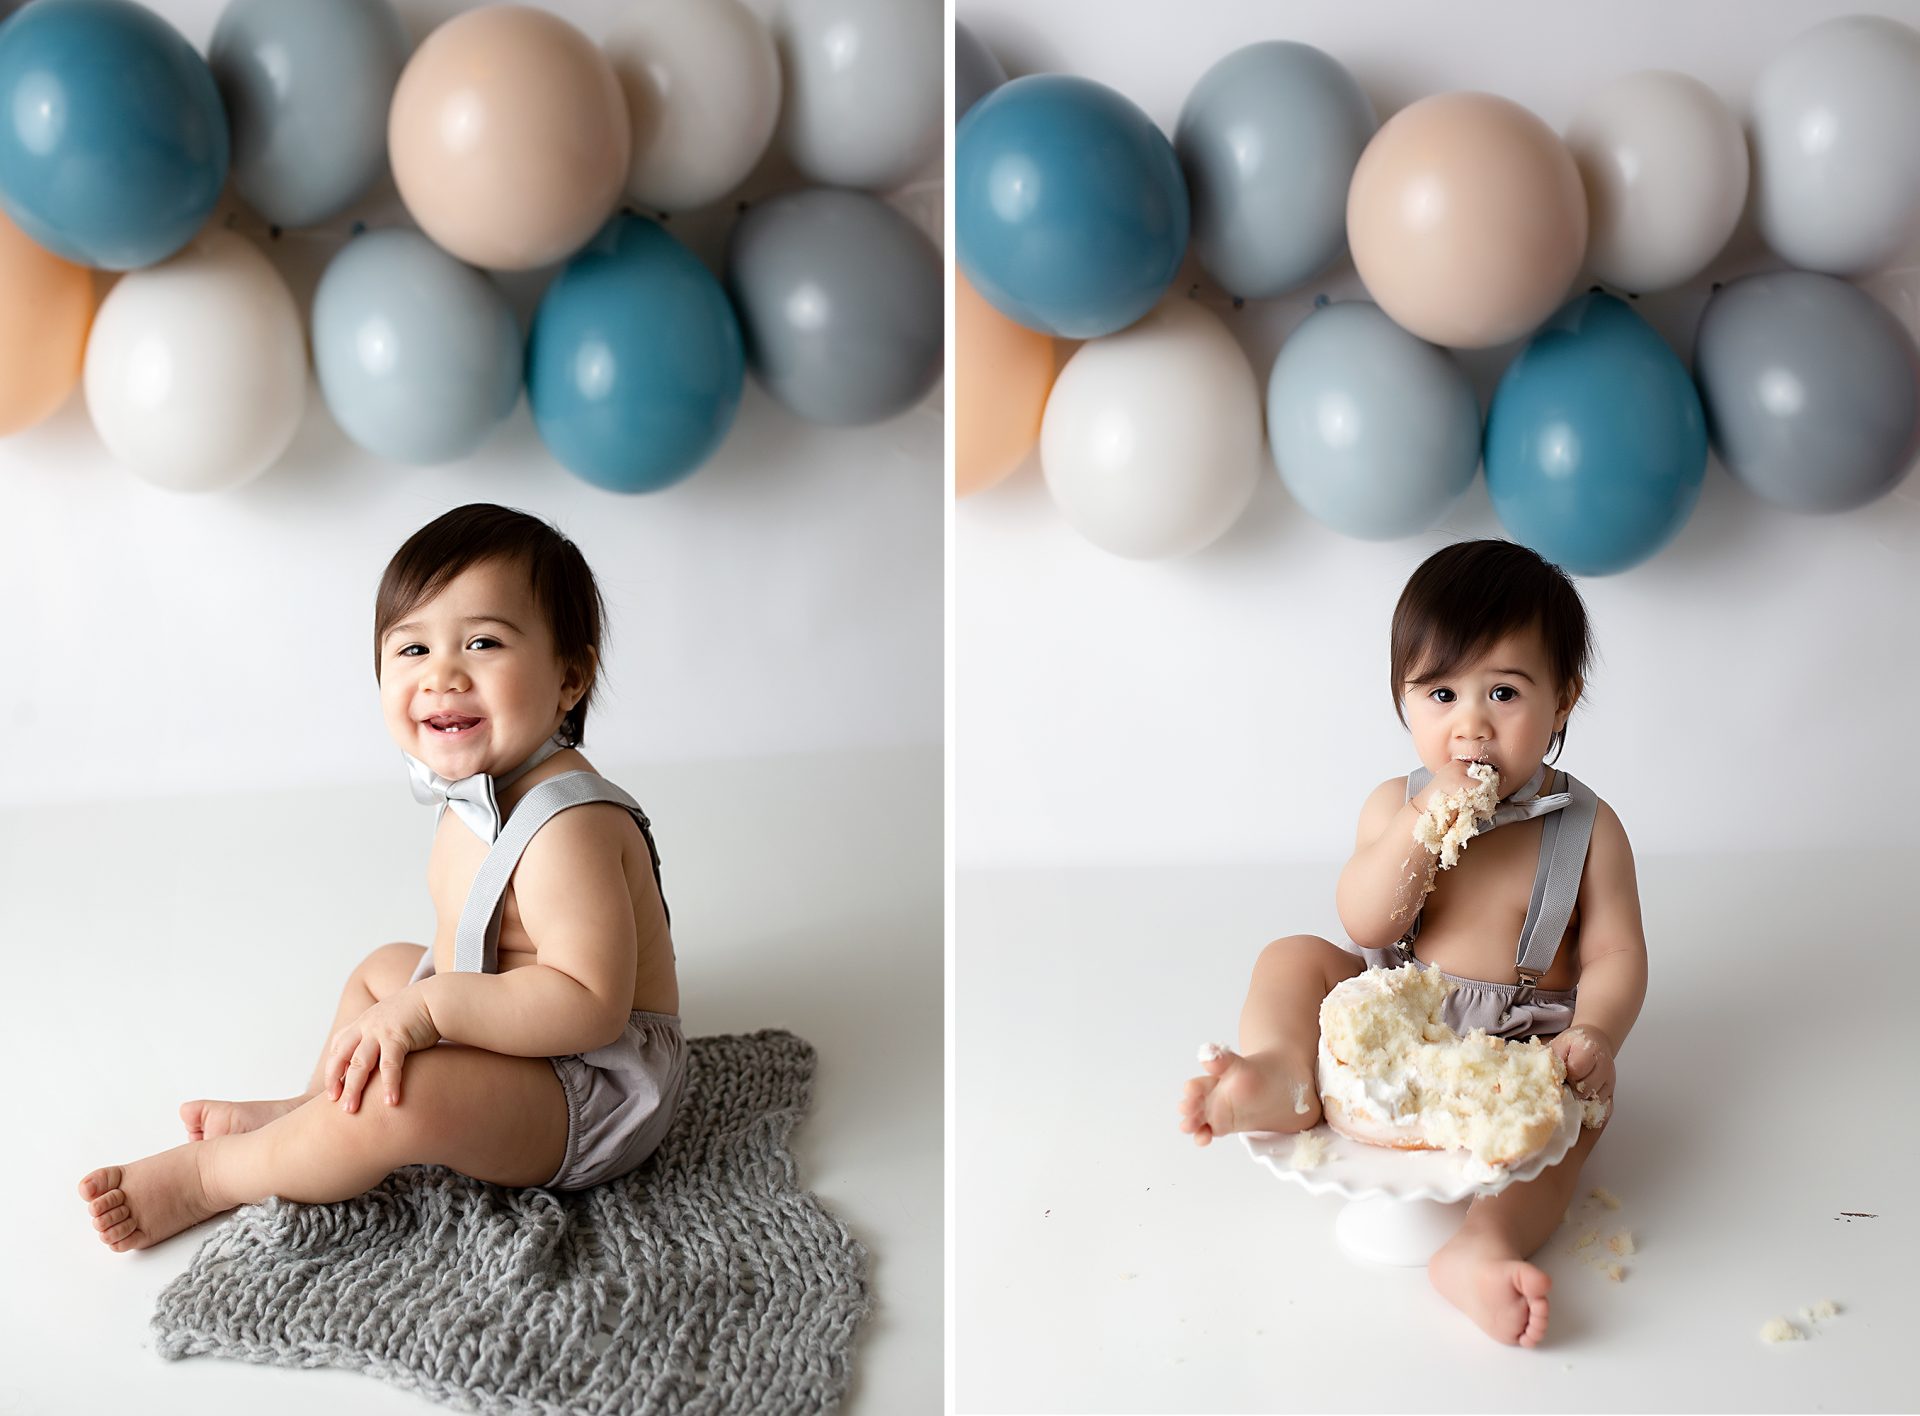 Duo picture of baby and balloons maternity photography shoot